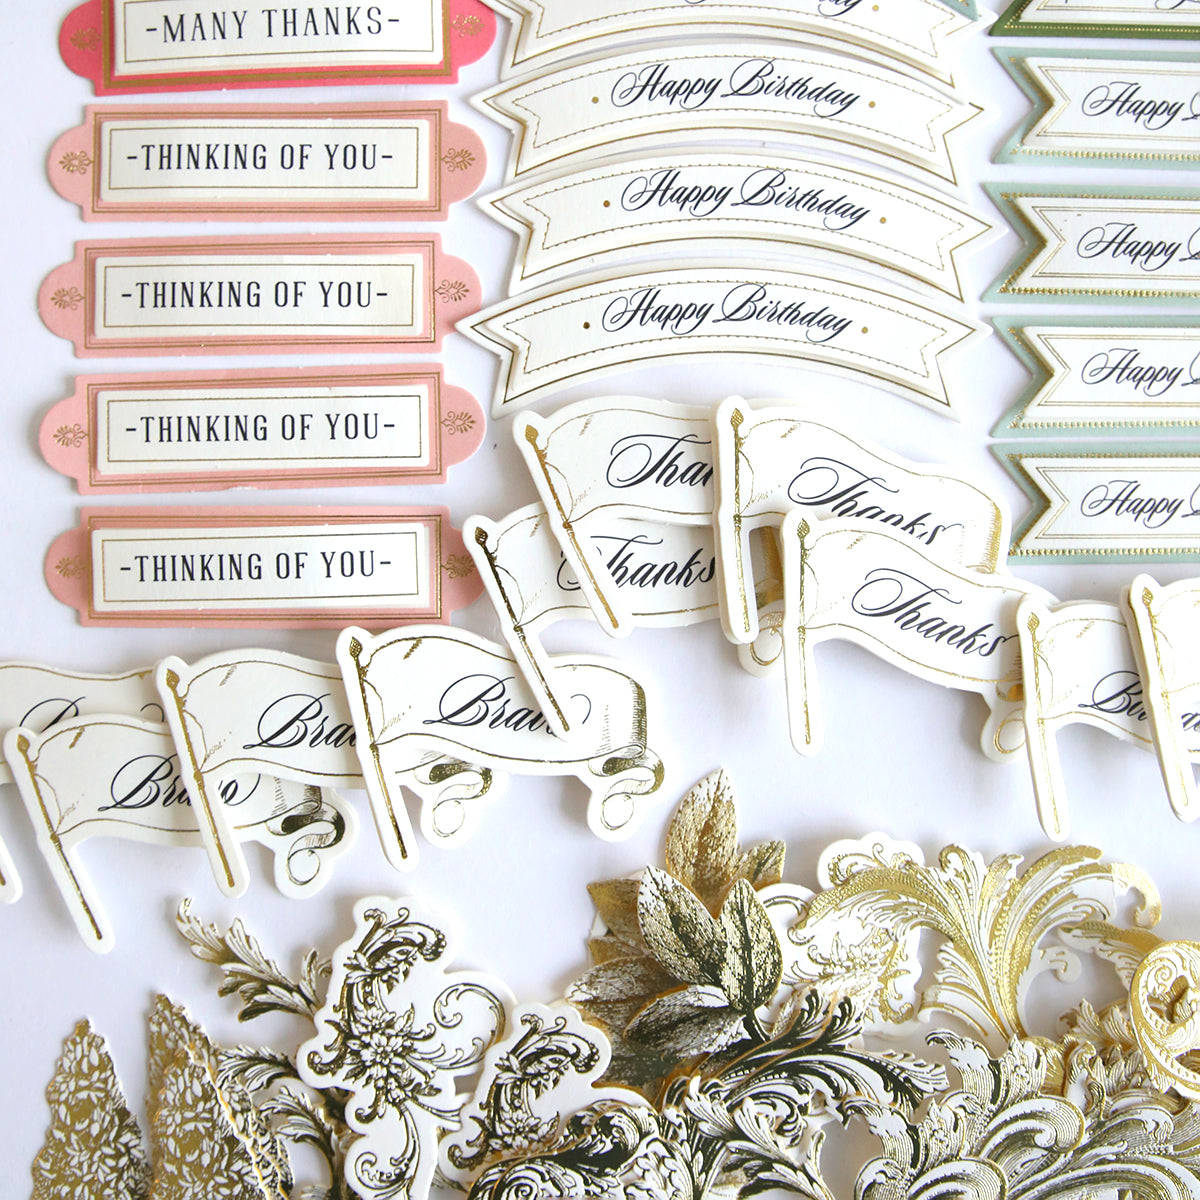 A collection of Garden Fountain Embellishments Craft Box cards and tags on a white surface, adorned with embellishments and displayed using easel cards.